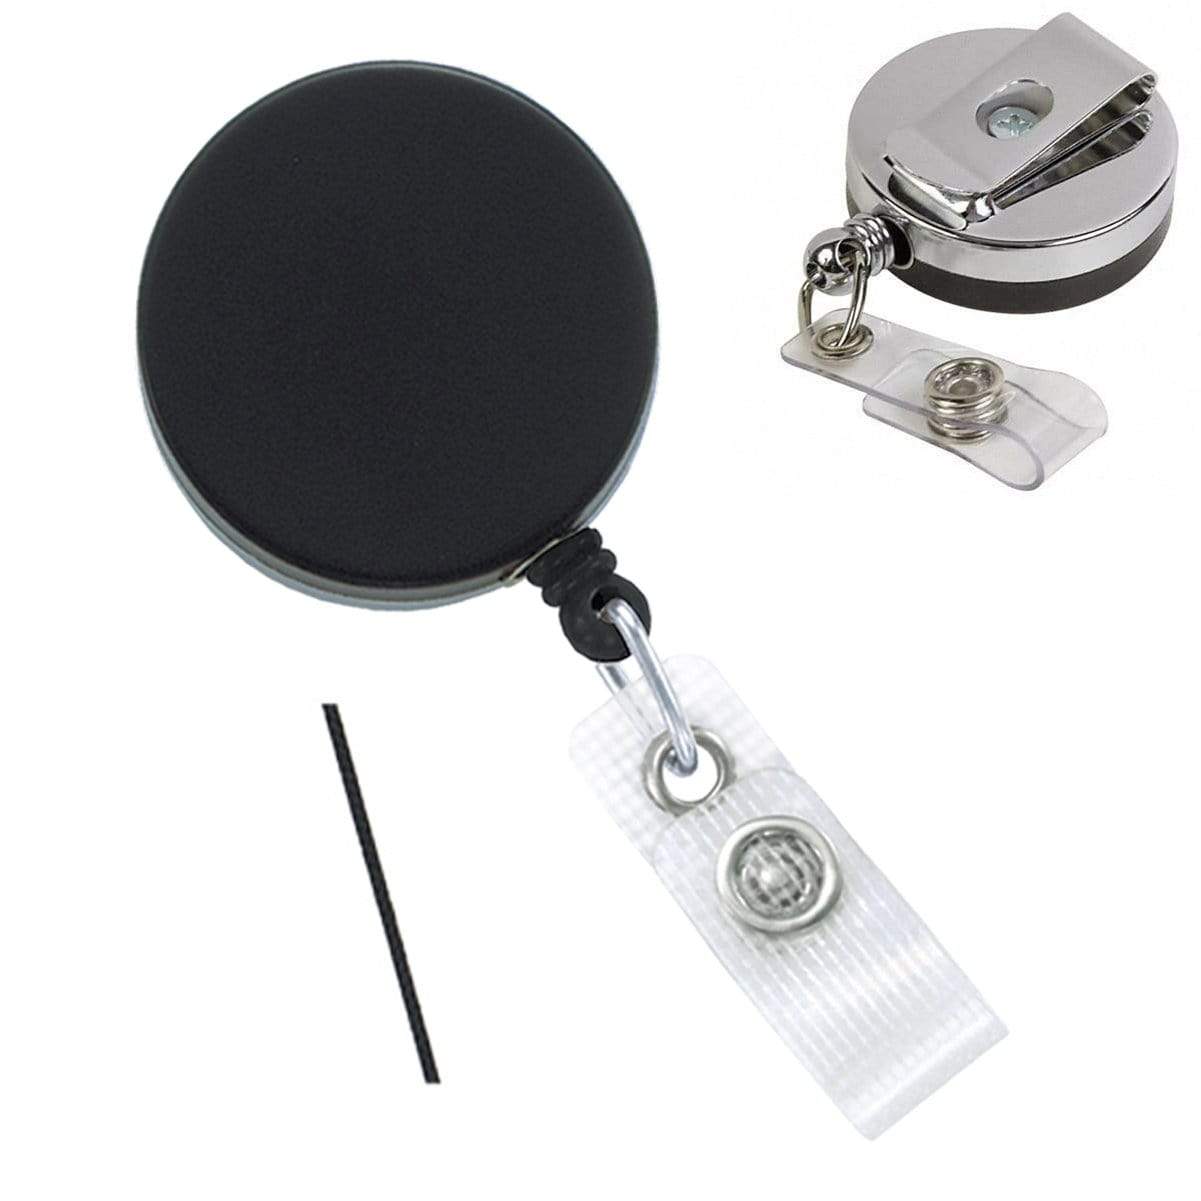 A Black Chrome Heavy Duty Badge Reel with Belt Clip (2120-3300) and a horizontal badge holder attachment.